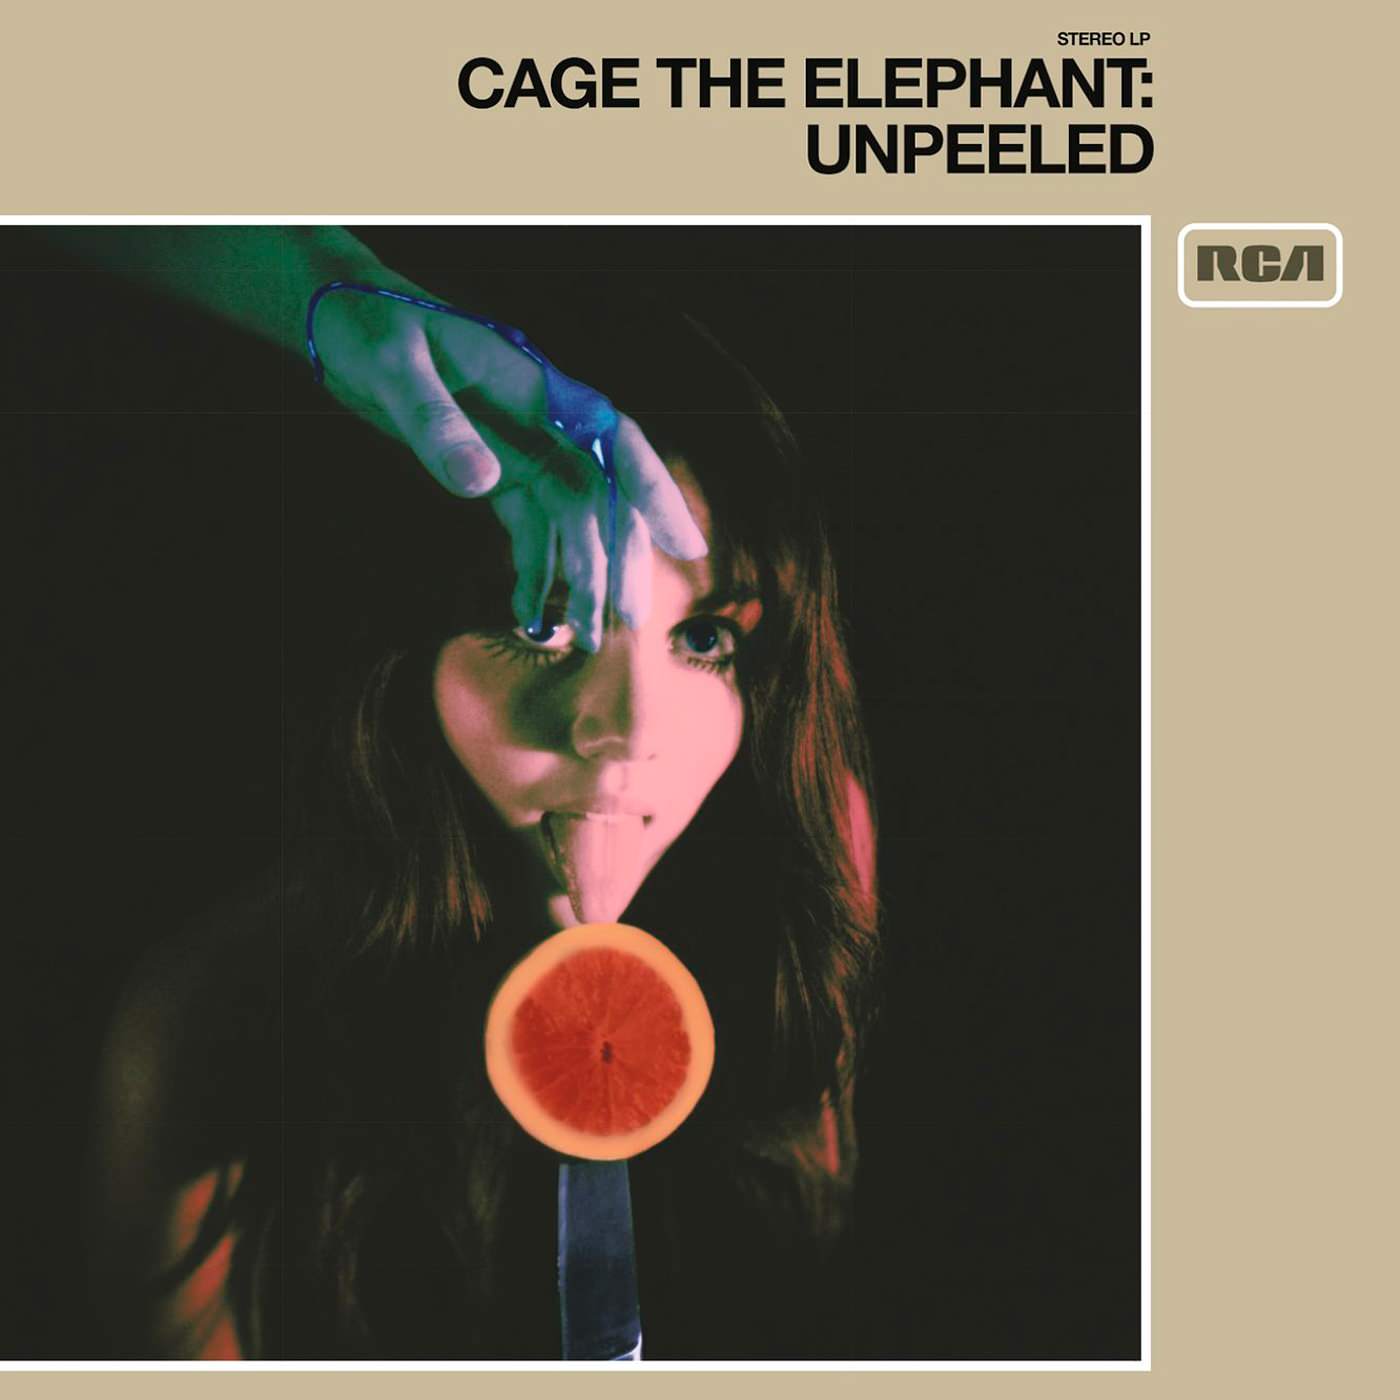 Cage The Elephant - Unpeeled (2017) [FLAC 24bit/48kHz]